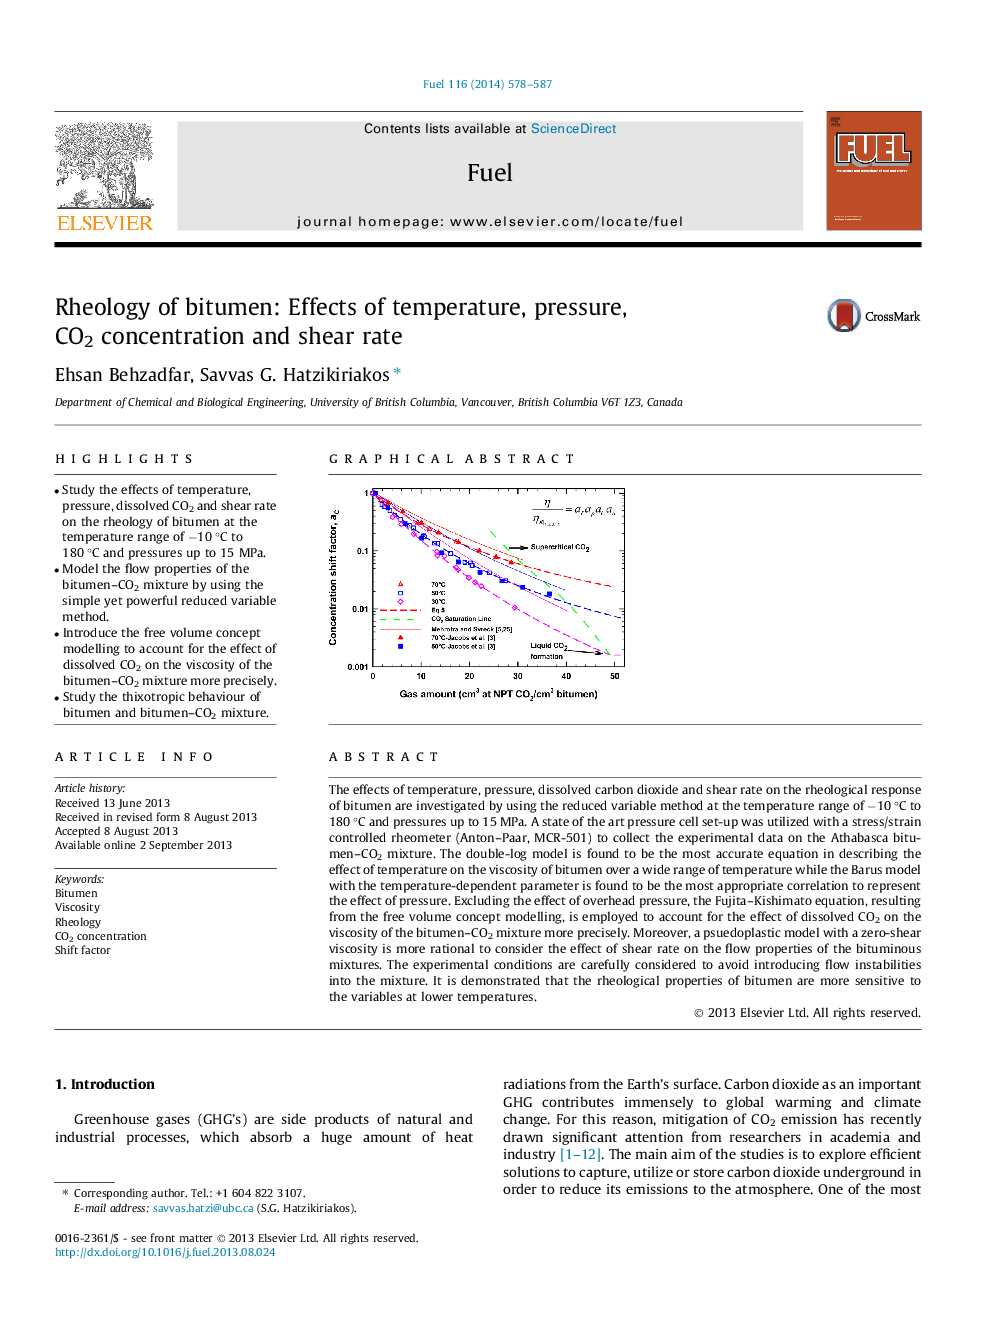 Rheology of bitumen: Effects of temperature, pressure, CO2 concentration and shear rate